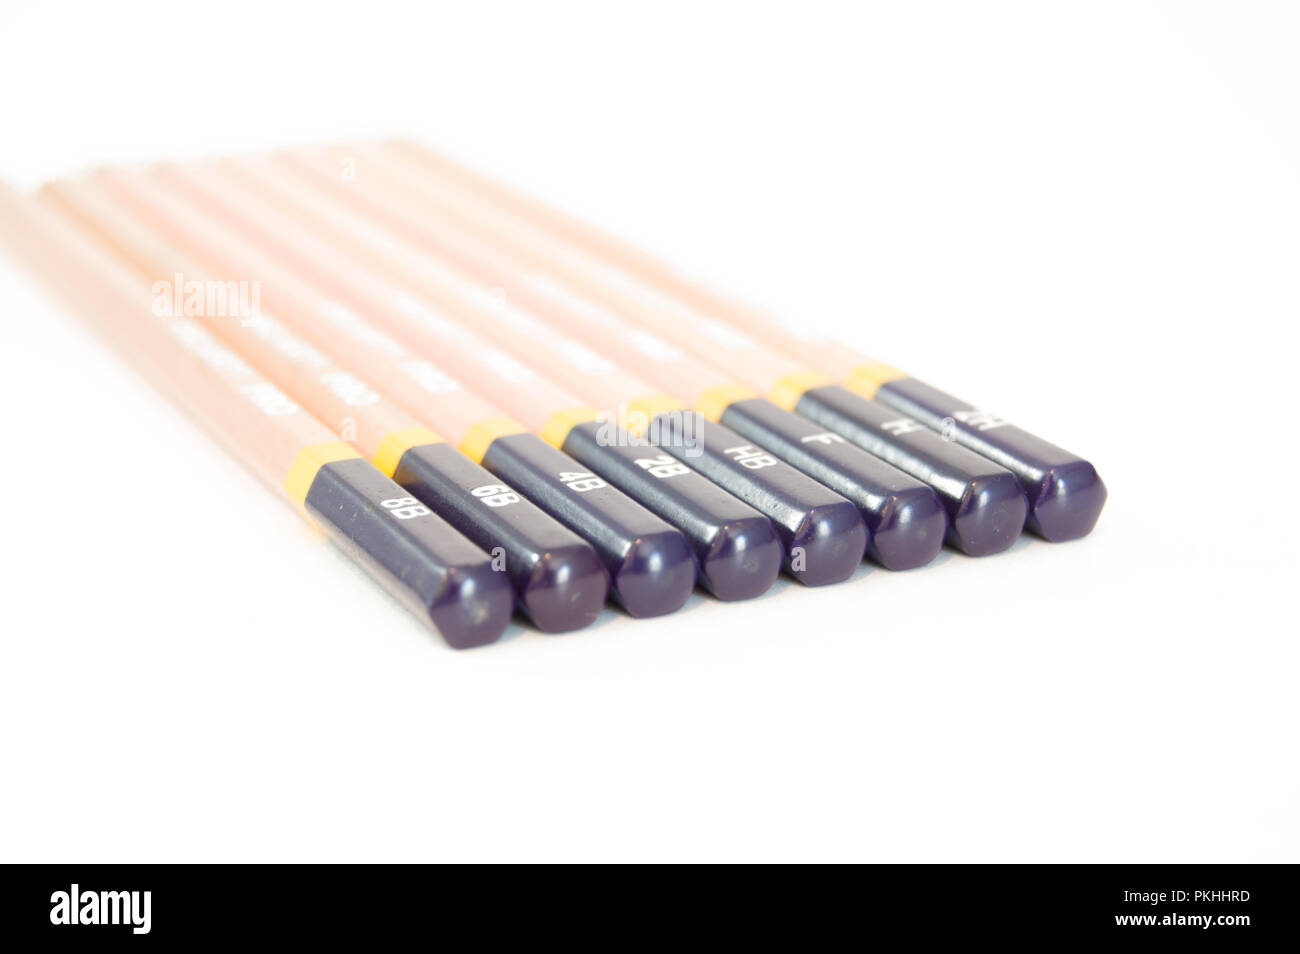 A set of drawing pencils from overhead on a white background. Stock Photo